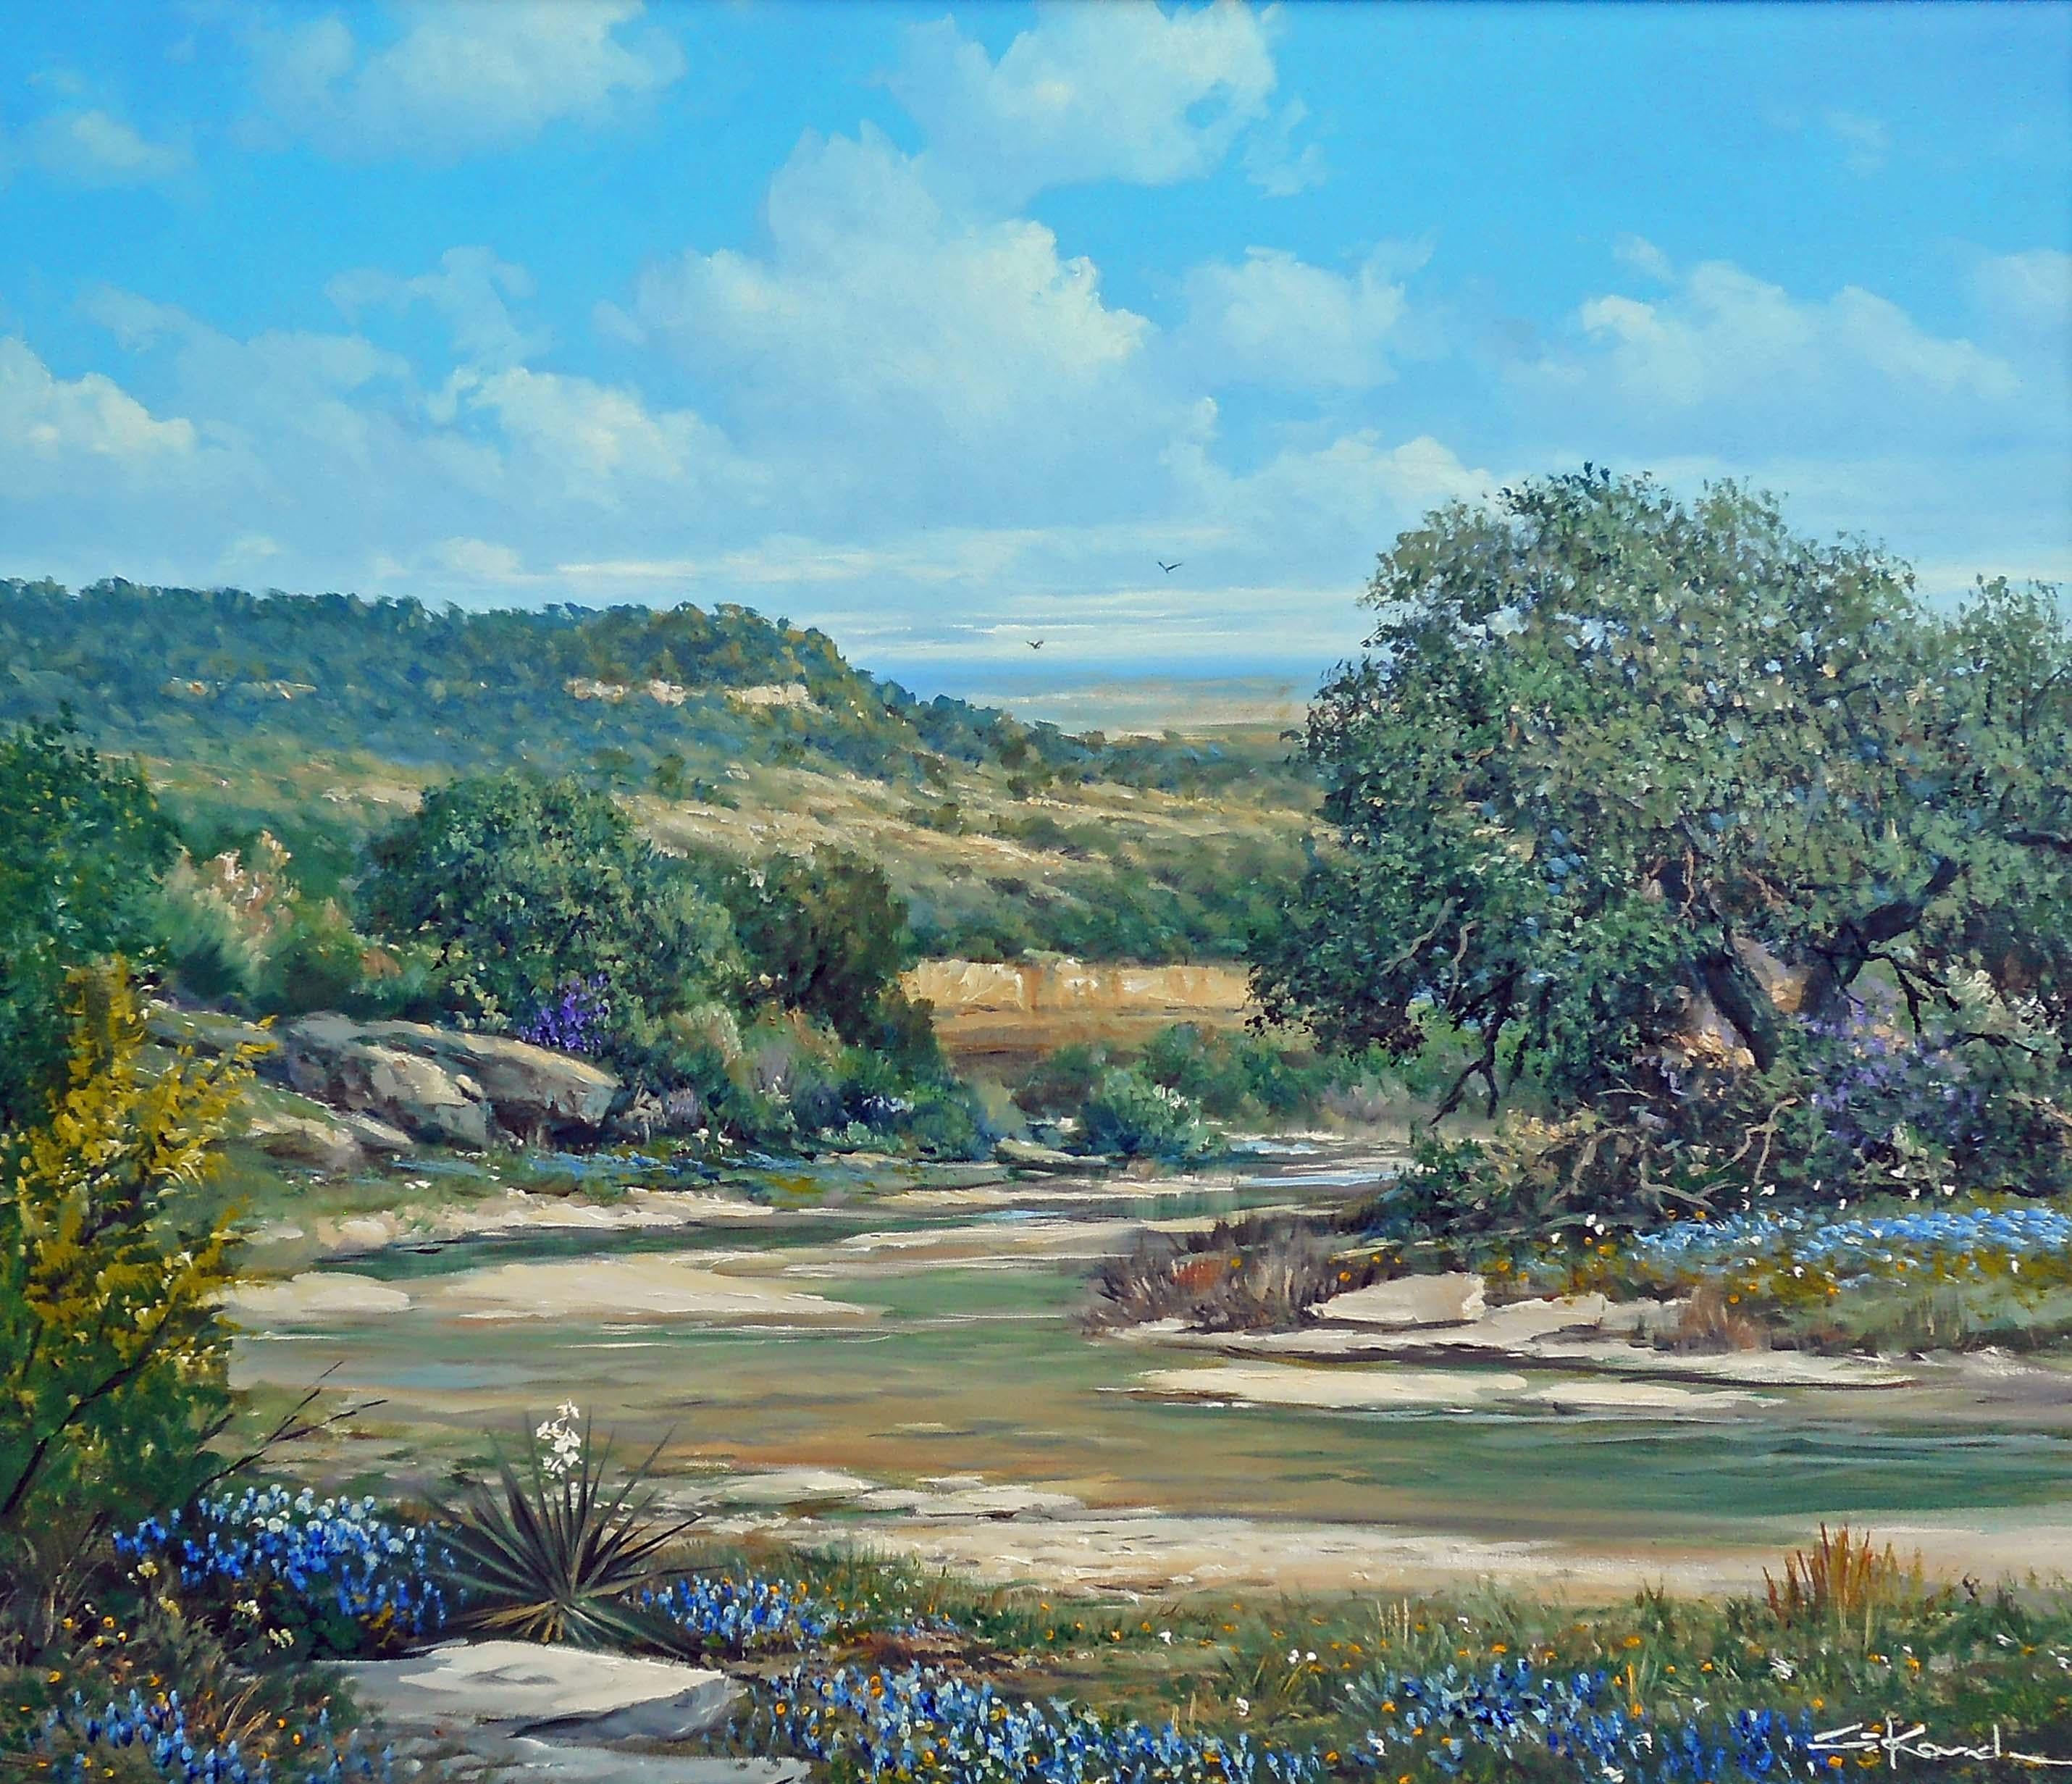 Heart of Texas - Painting by George Kovach